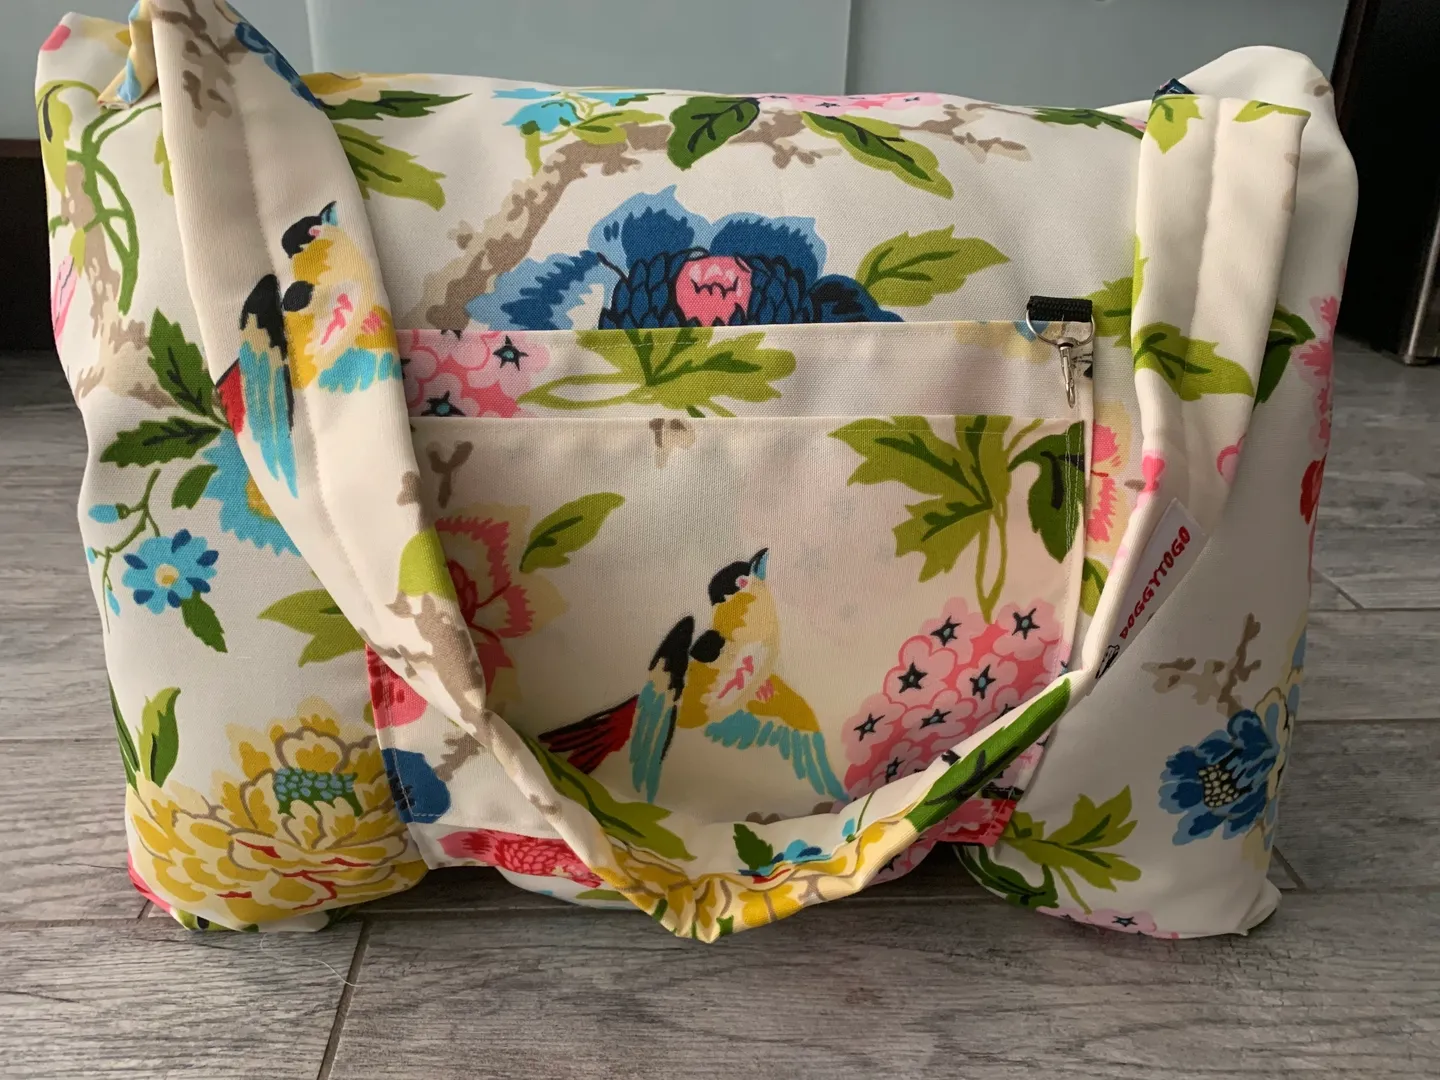 A white color dog bed bag with designs of birds, flowers, and leaves